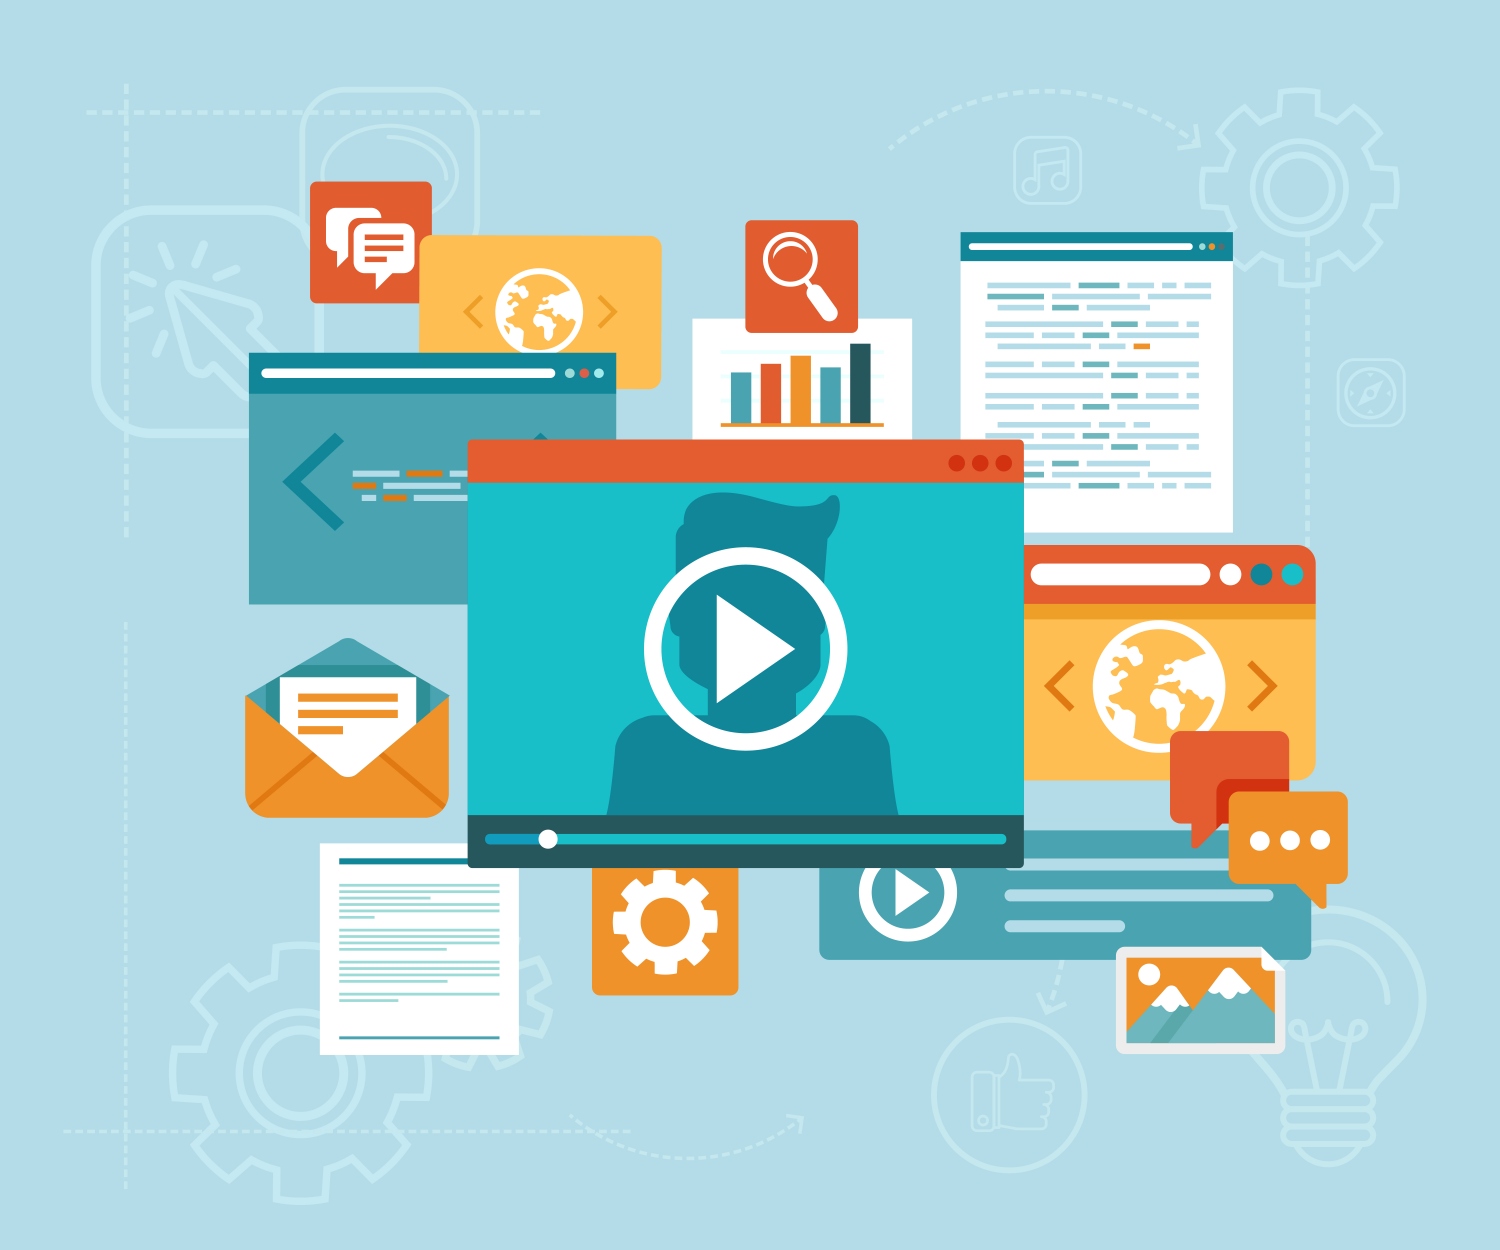 How To Make Use Of An Effective Video For Promoting Your Company